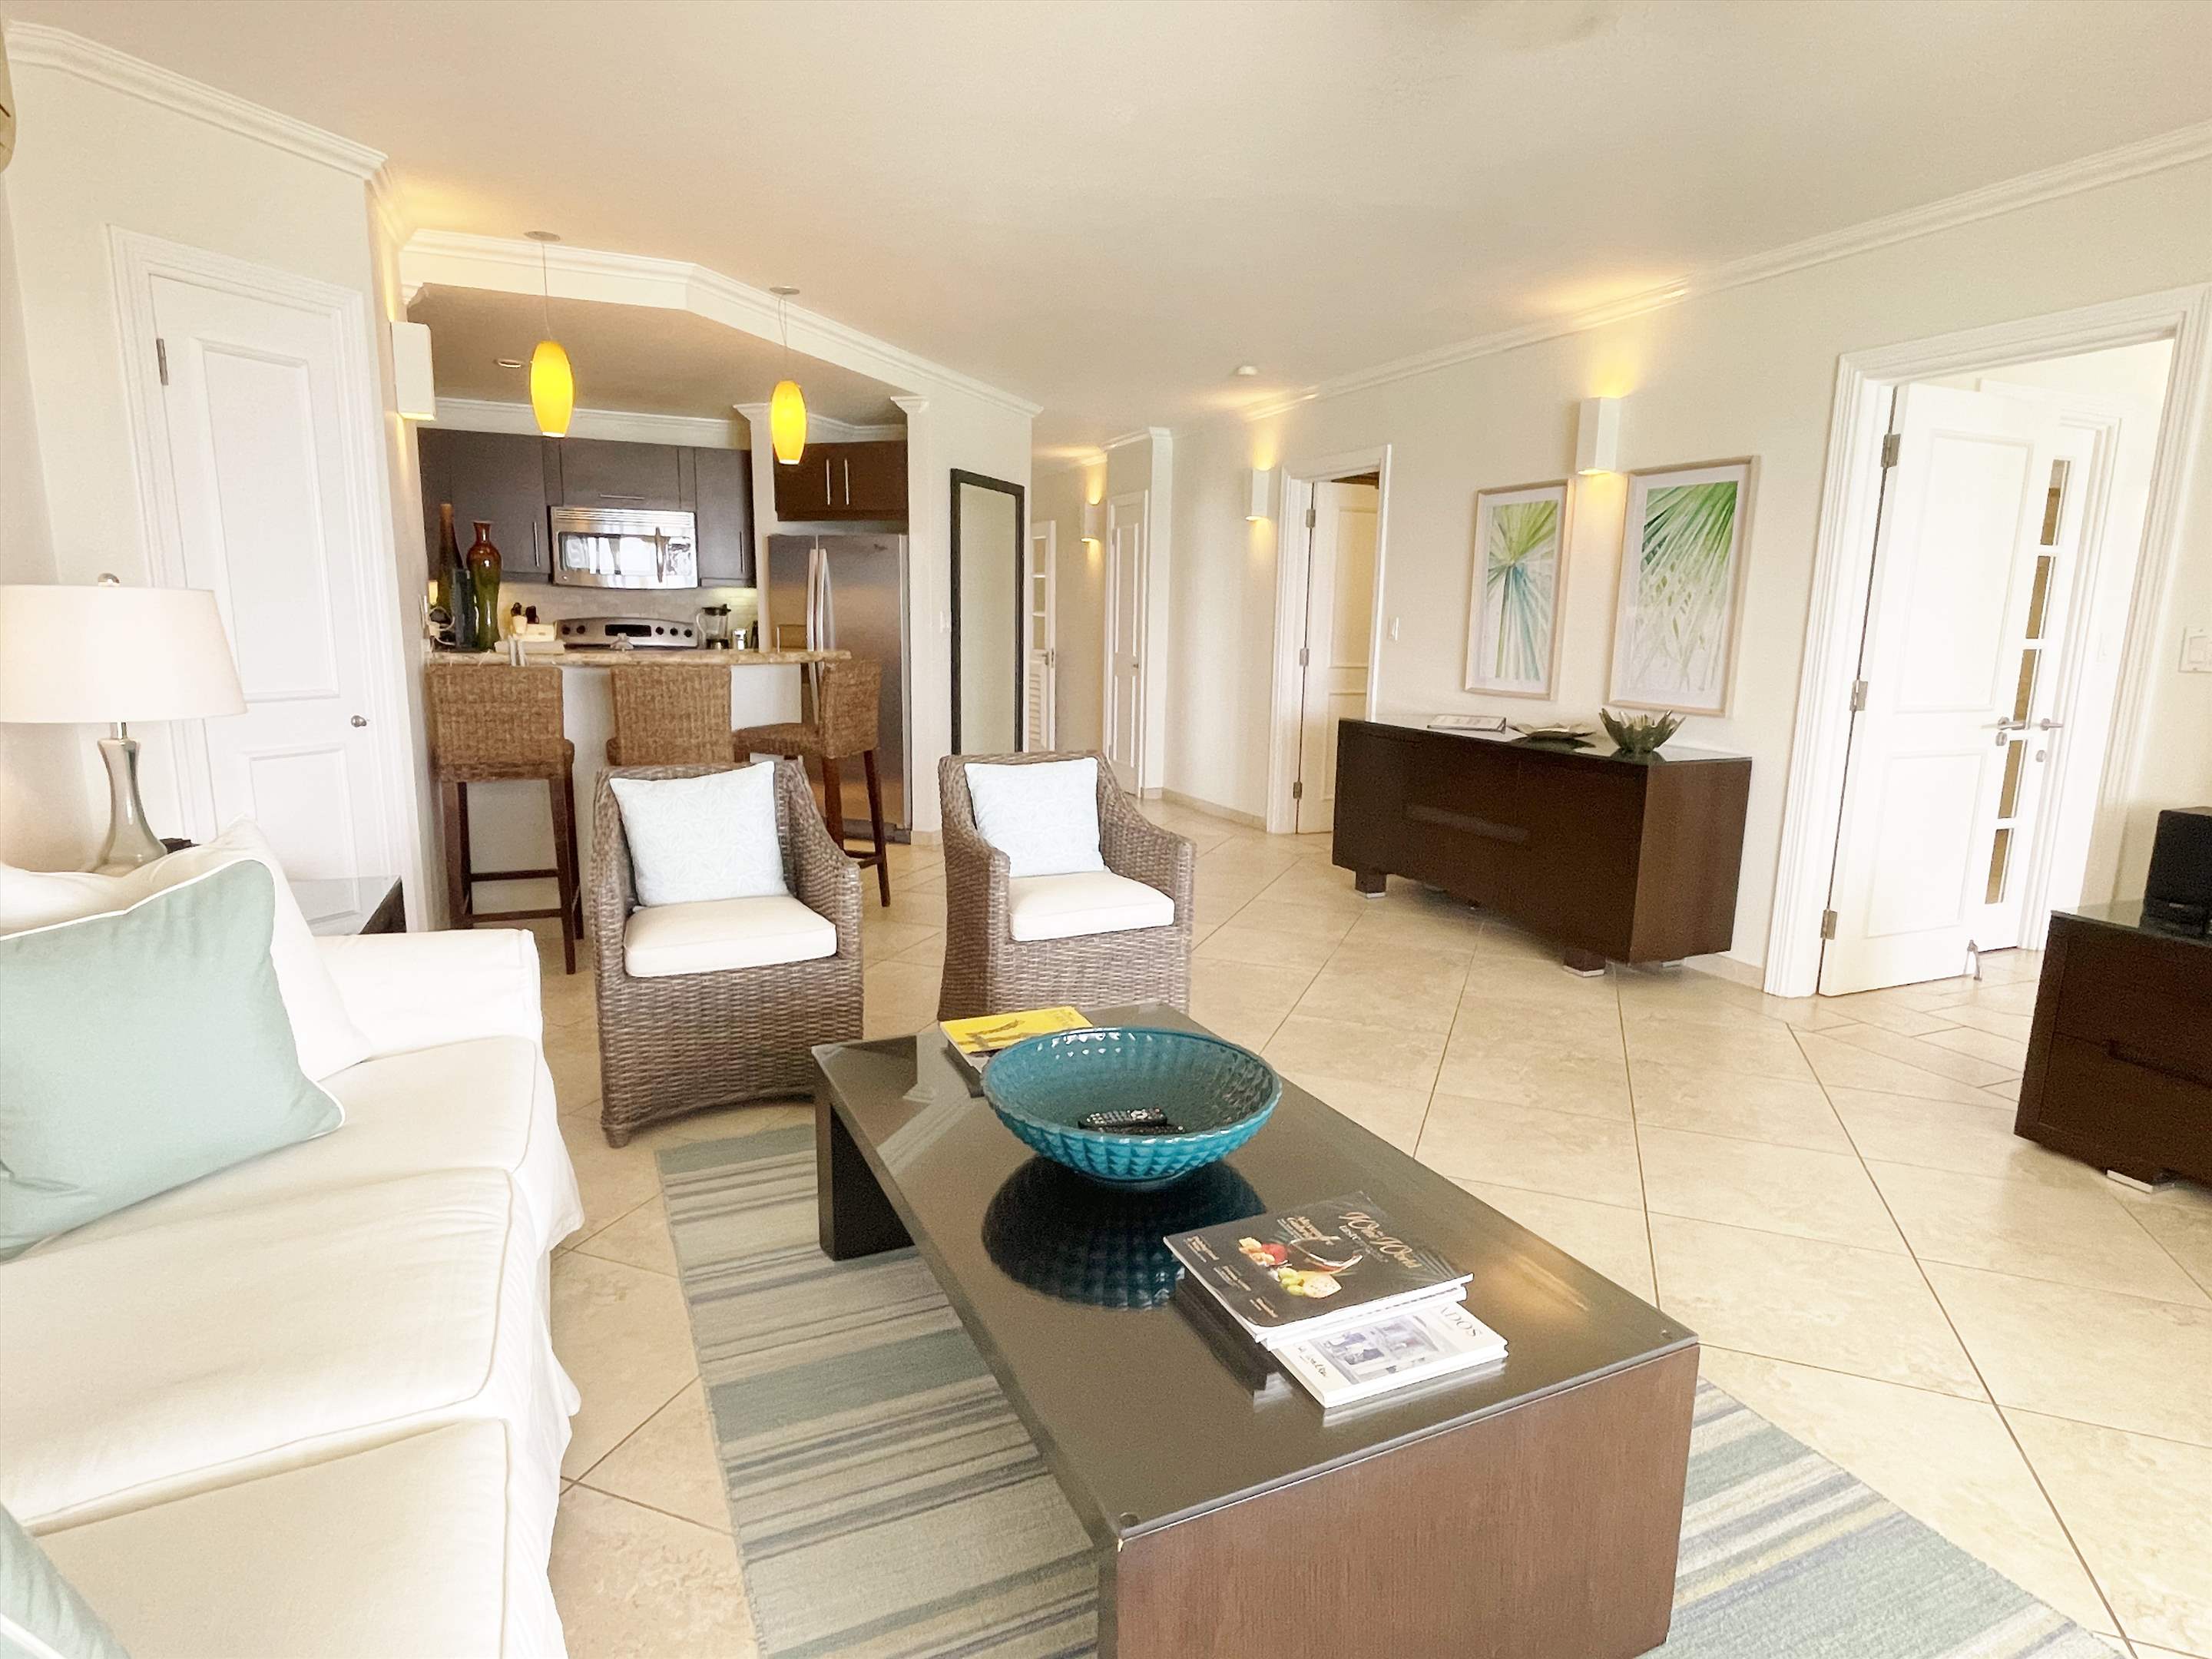 Sapphire Beach 505 , 3 Bedroom , 3 bedroom apartment in St. Lawrence Gap & South Coast, Barbados Photo #8